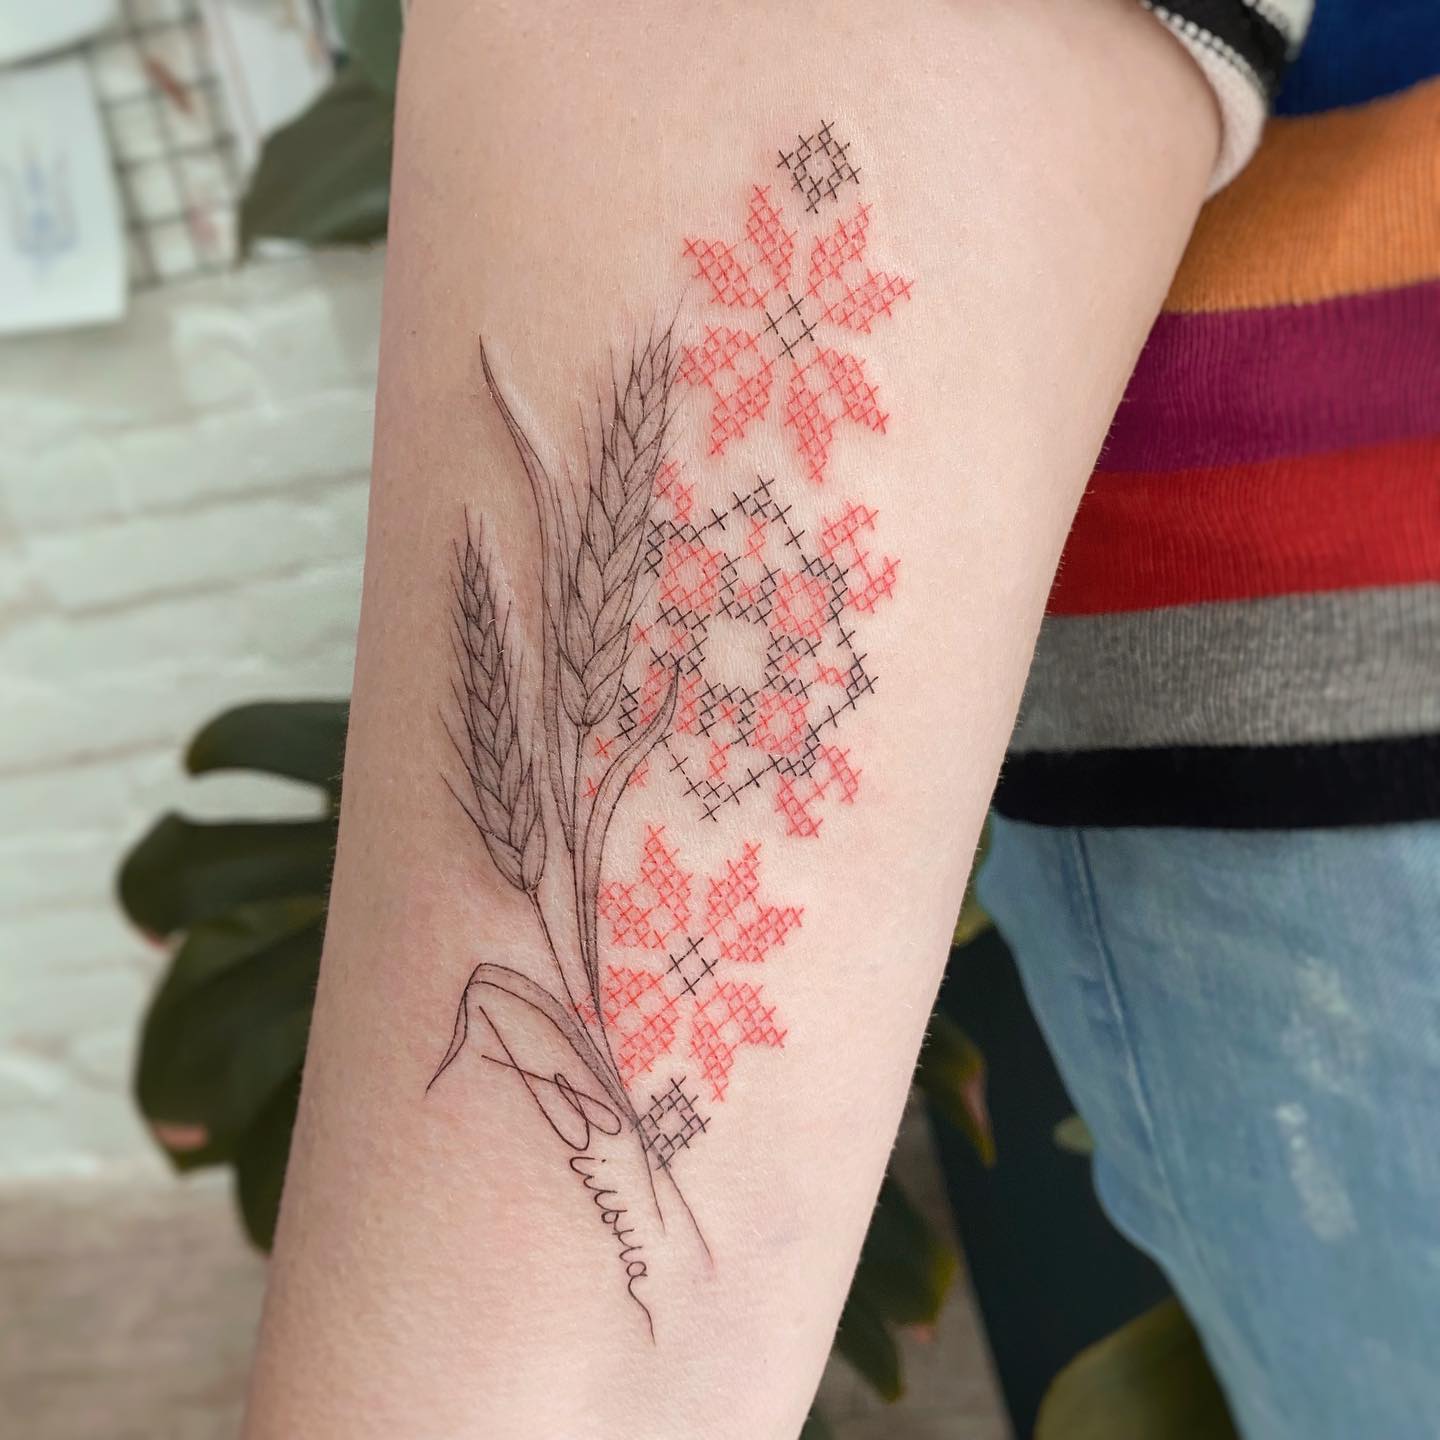 Black and red embroidery tattoo with spike